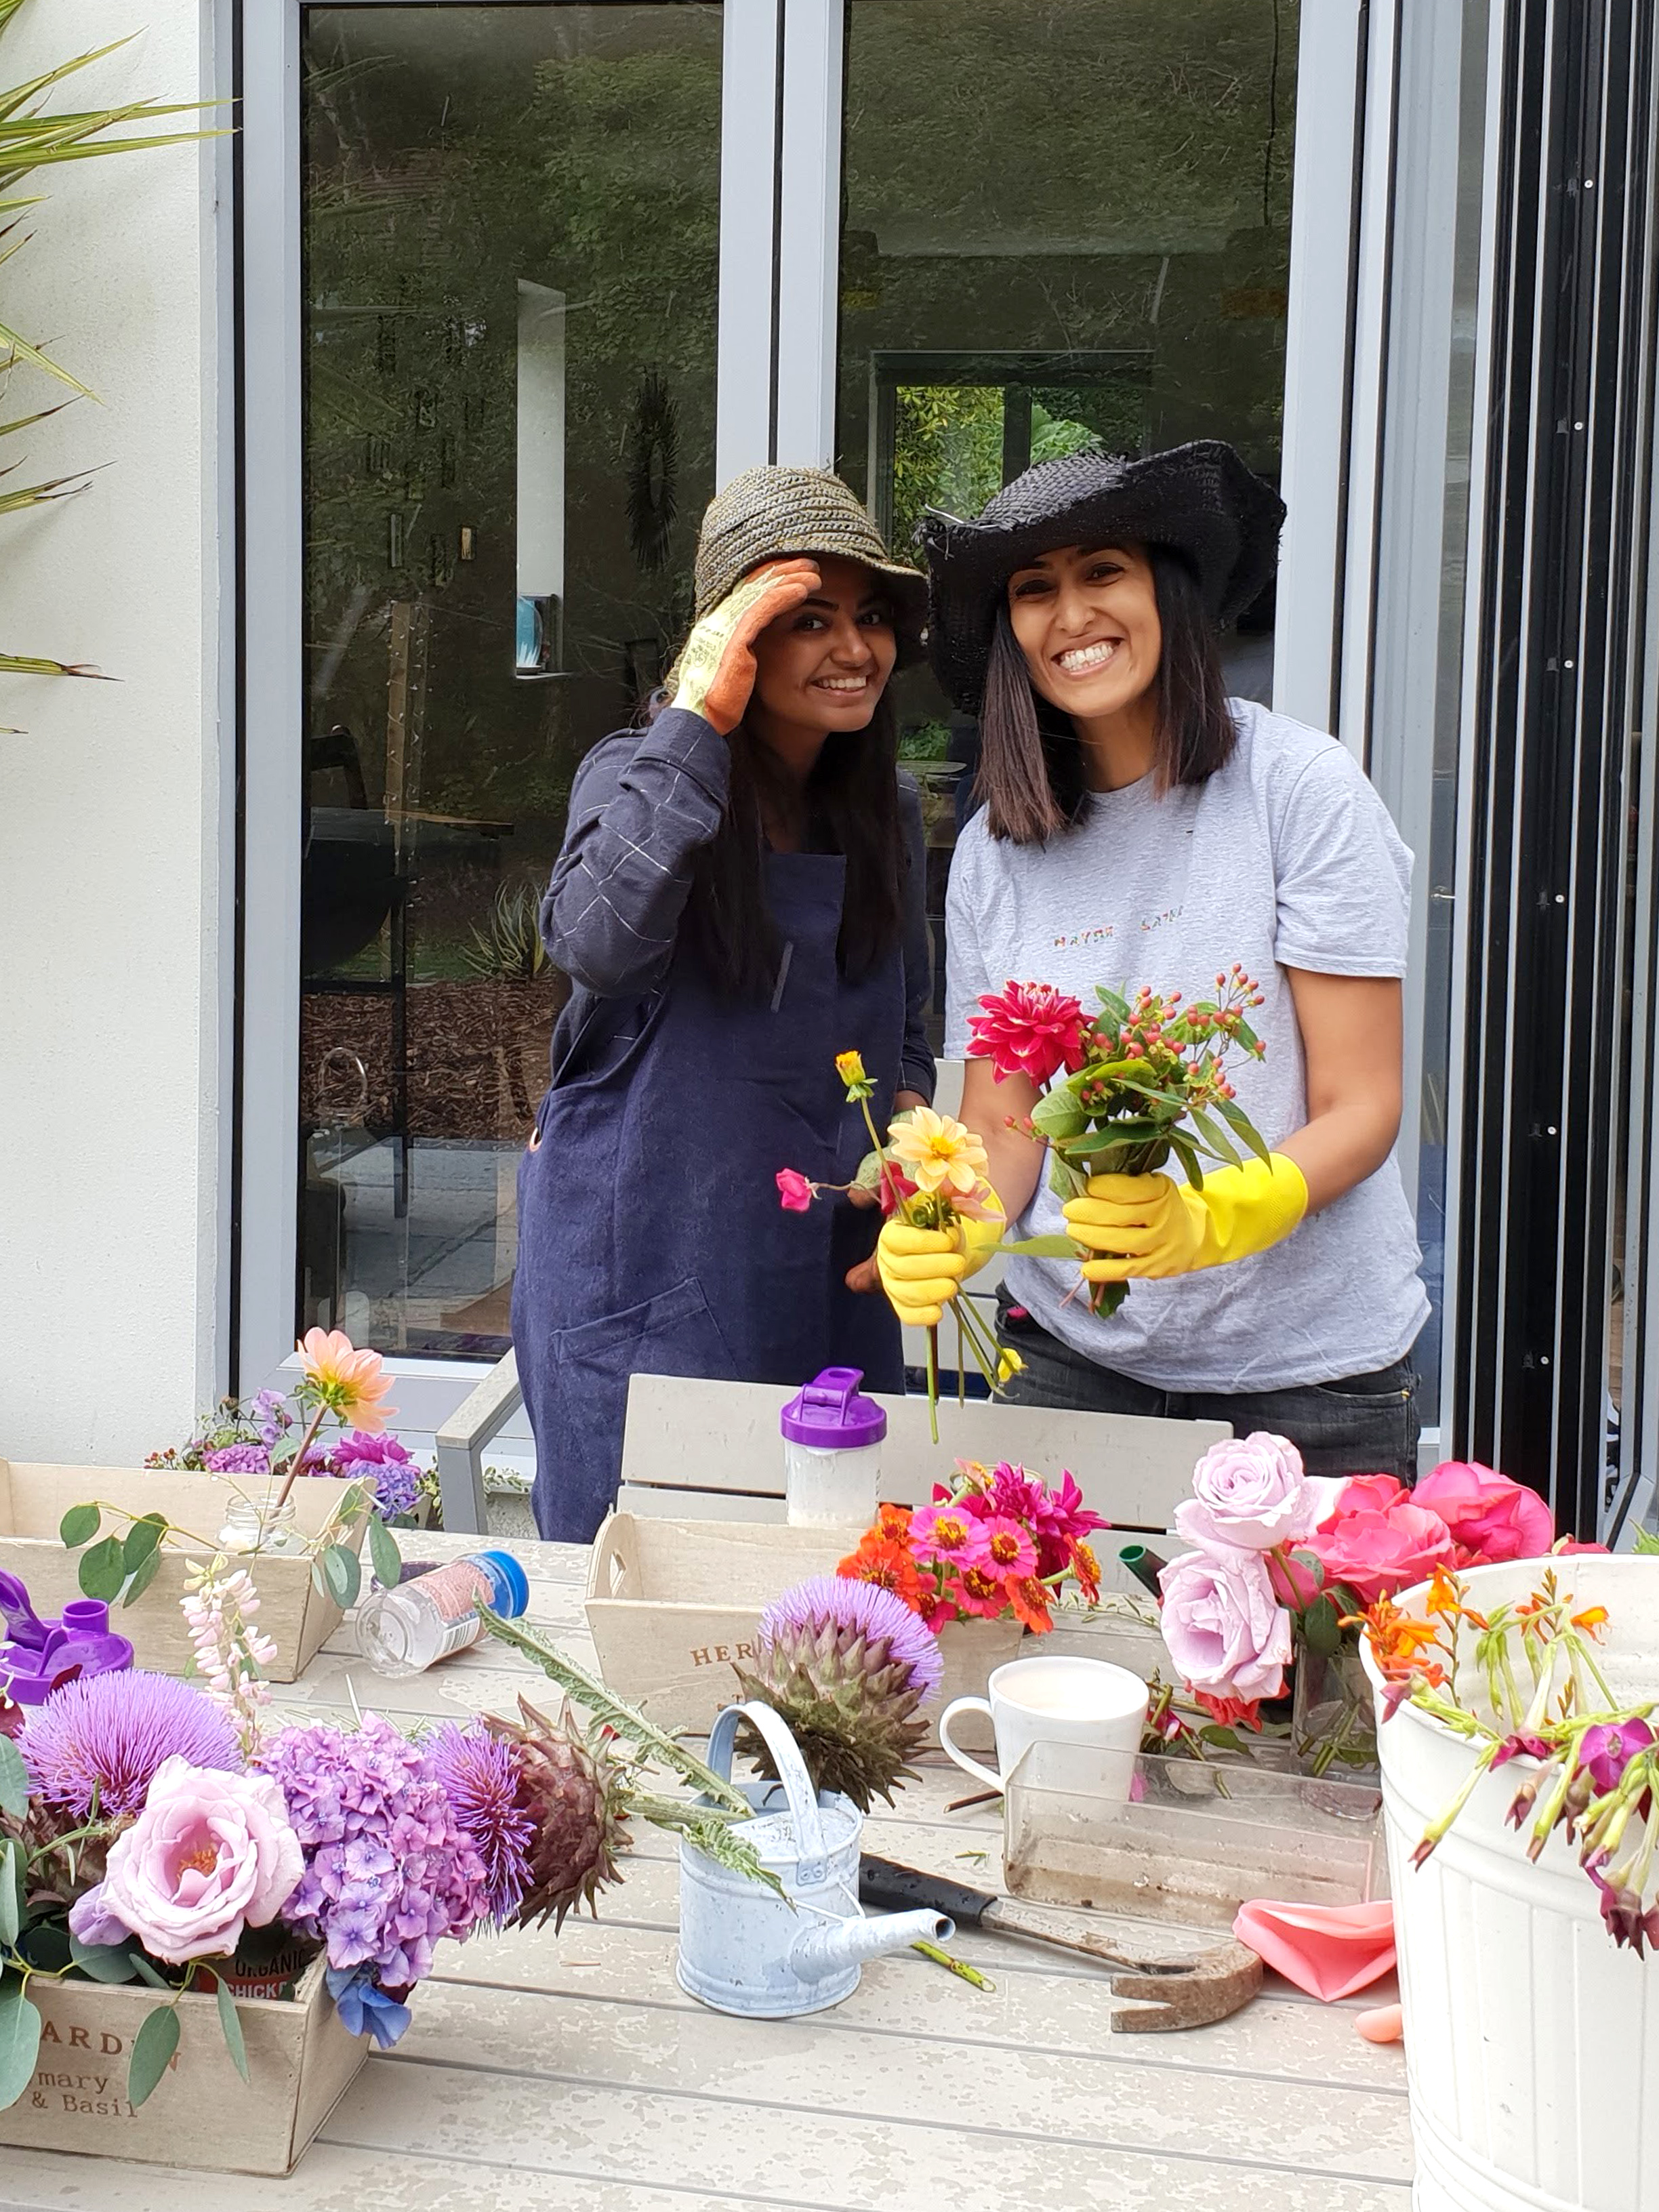 Uzma Bozai's top tips for creating an unforgettable garden party this bank holiday weekend.